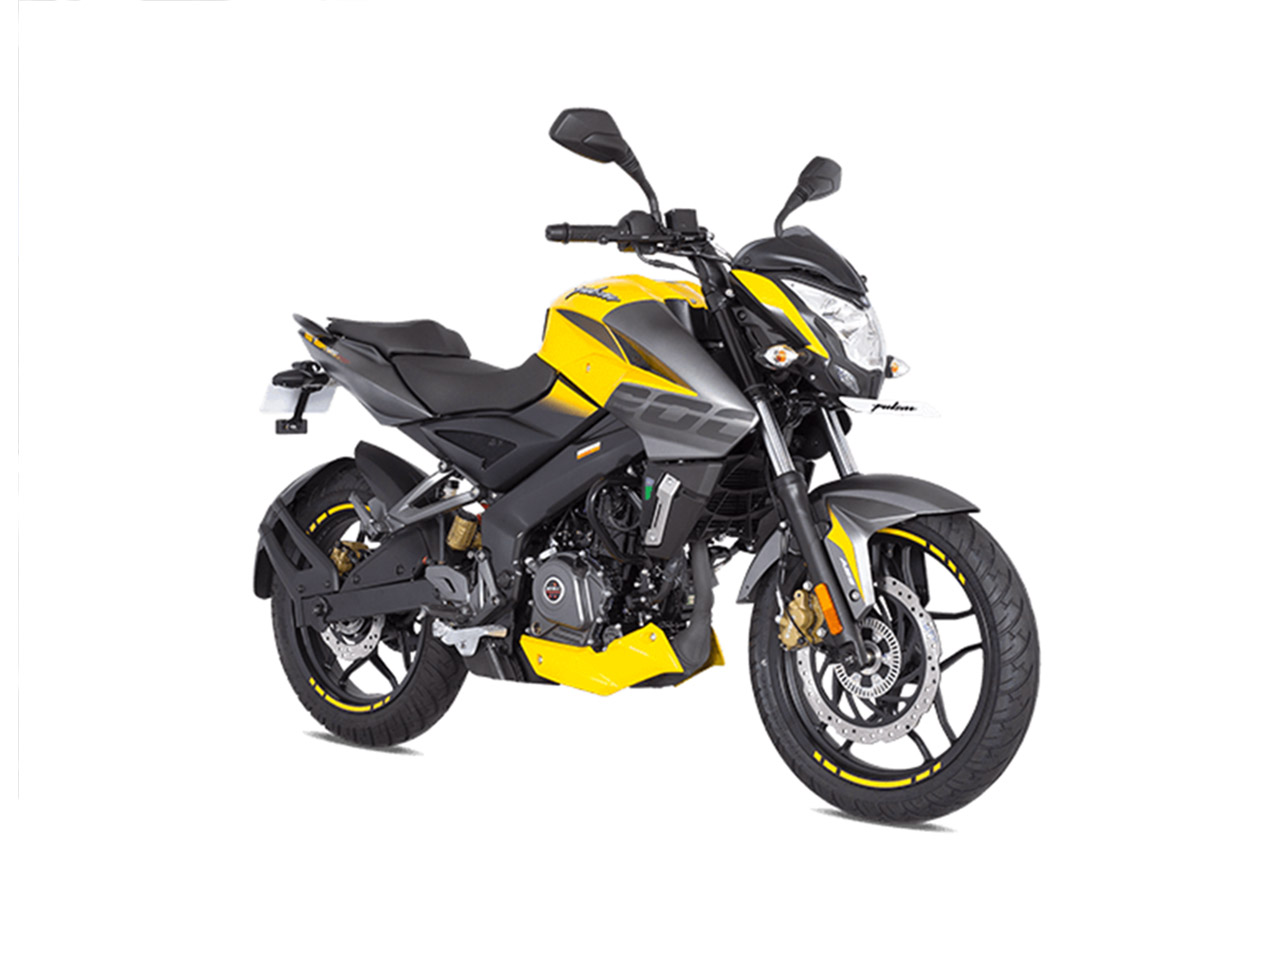 Bajaj Pulsar 220f Ns200 Bs6 Prices Increased By Rs 1000 Second Hike